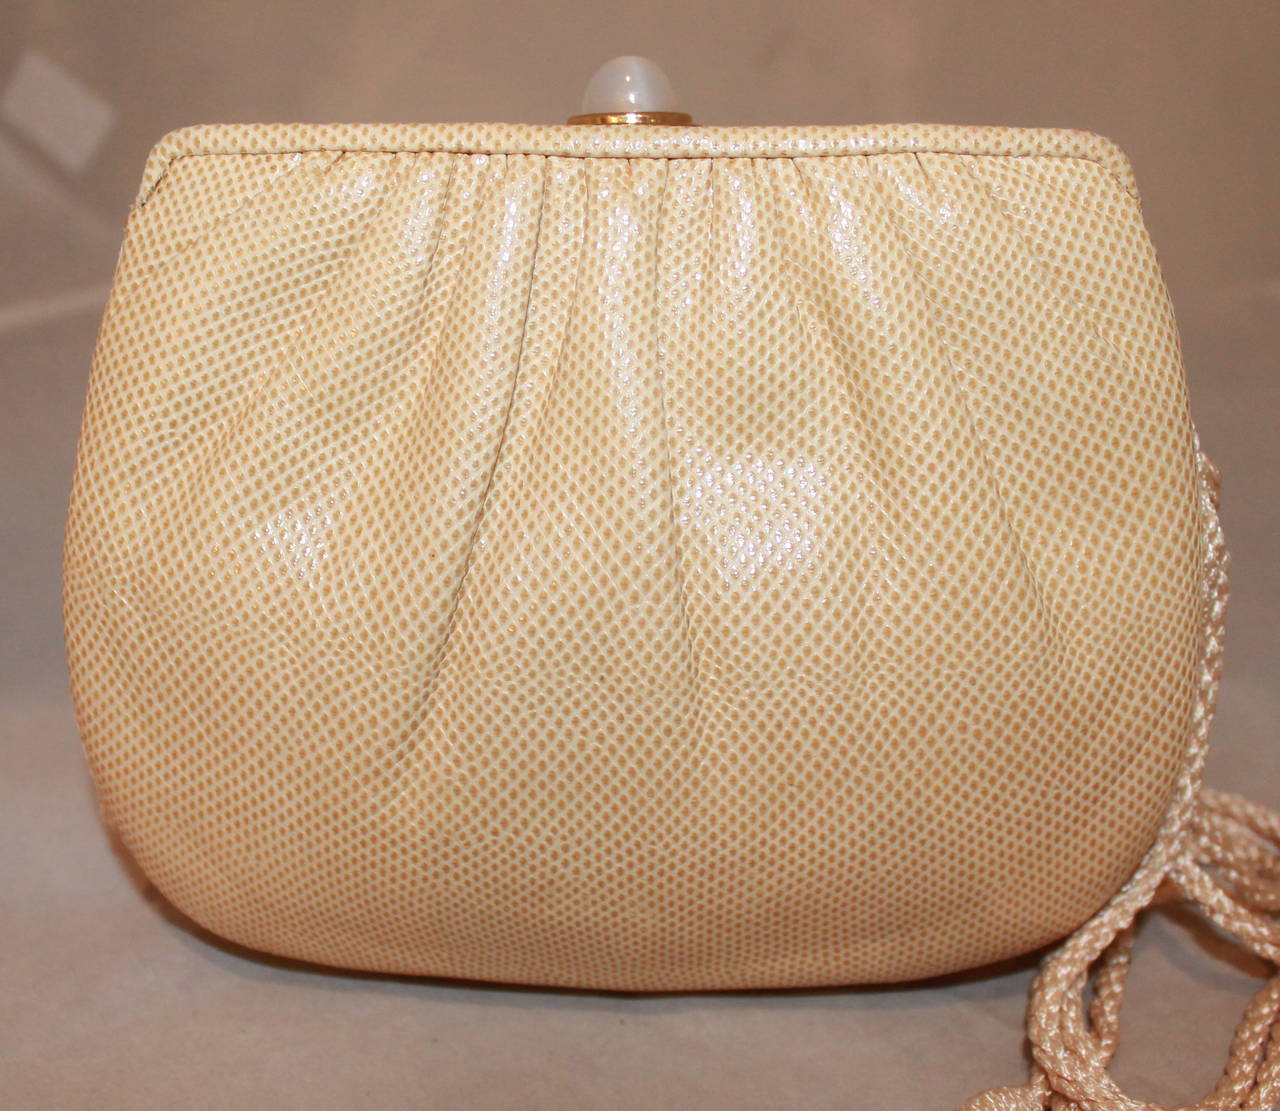 Judith Leiber Vintage Creme Karung Clutch & Crossbody - circa 1990s. This bag is in excellent condition and comes with a comb. The gold threading on the comb has been frayed.

Measurements:
Length- 5.5